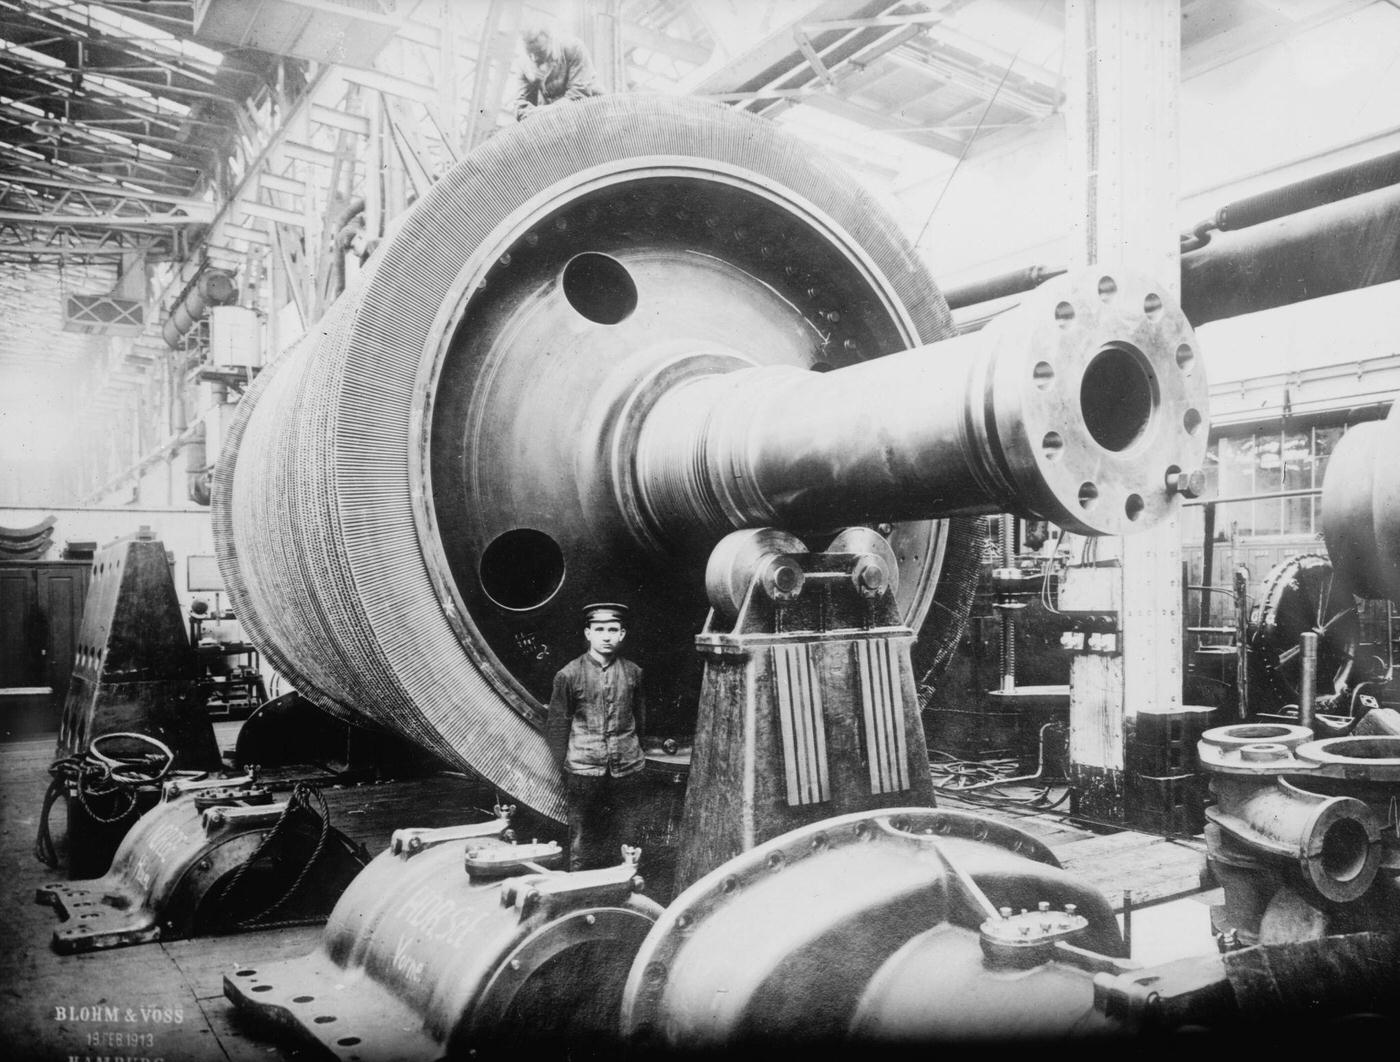 Preparation of the turbine that drove the Hamburg-American Line's Vaterland, the largest passenger ship of its day, 1912